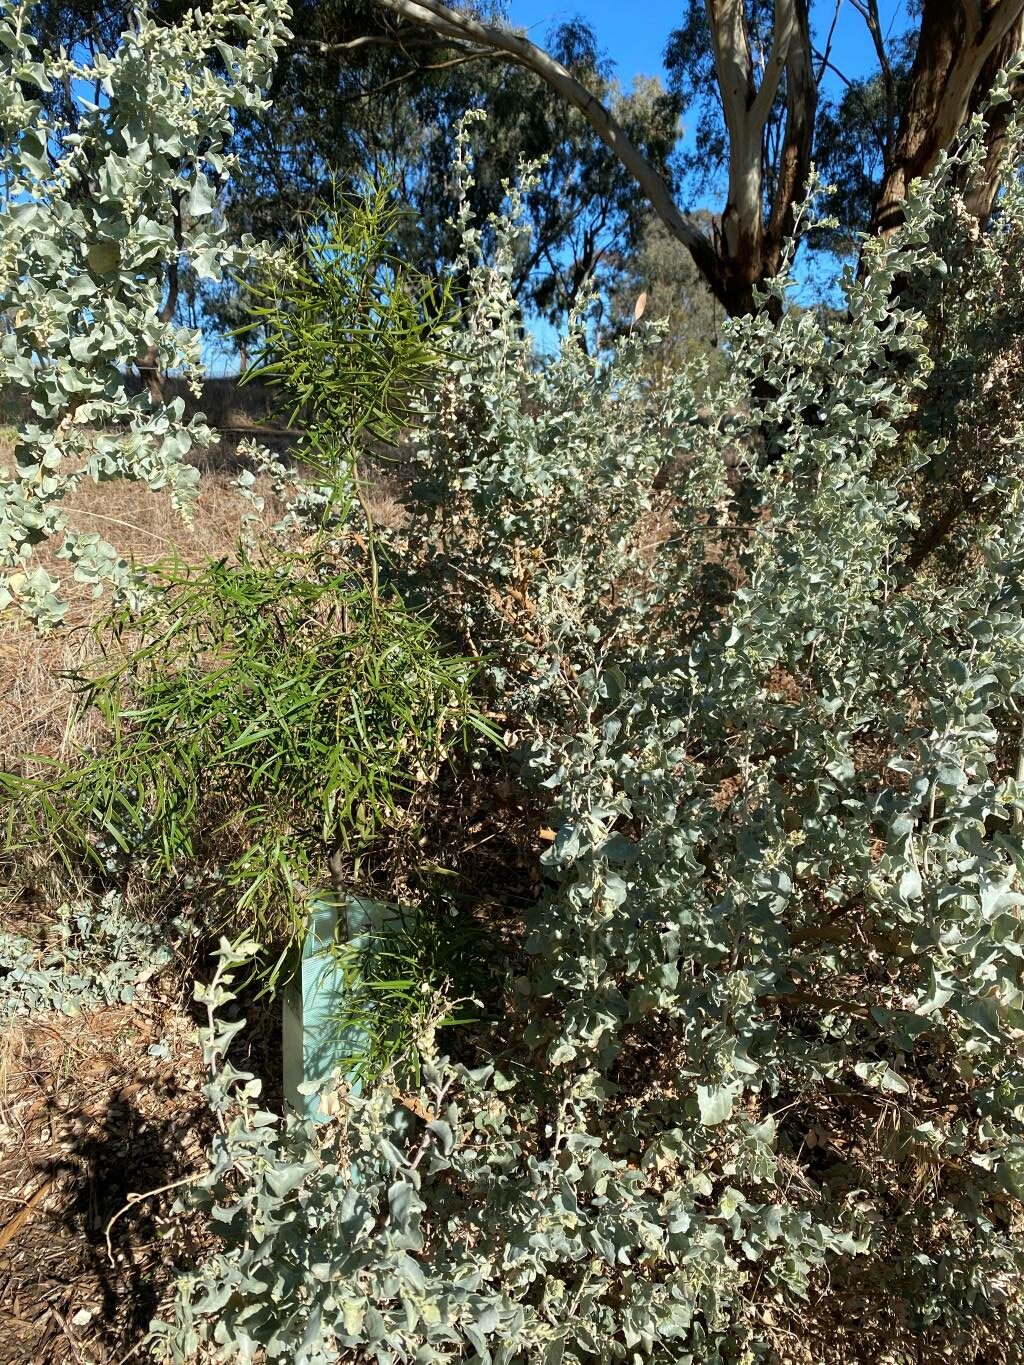 Quandong growing beside an Old Man Saltbush protected by a tree guard